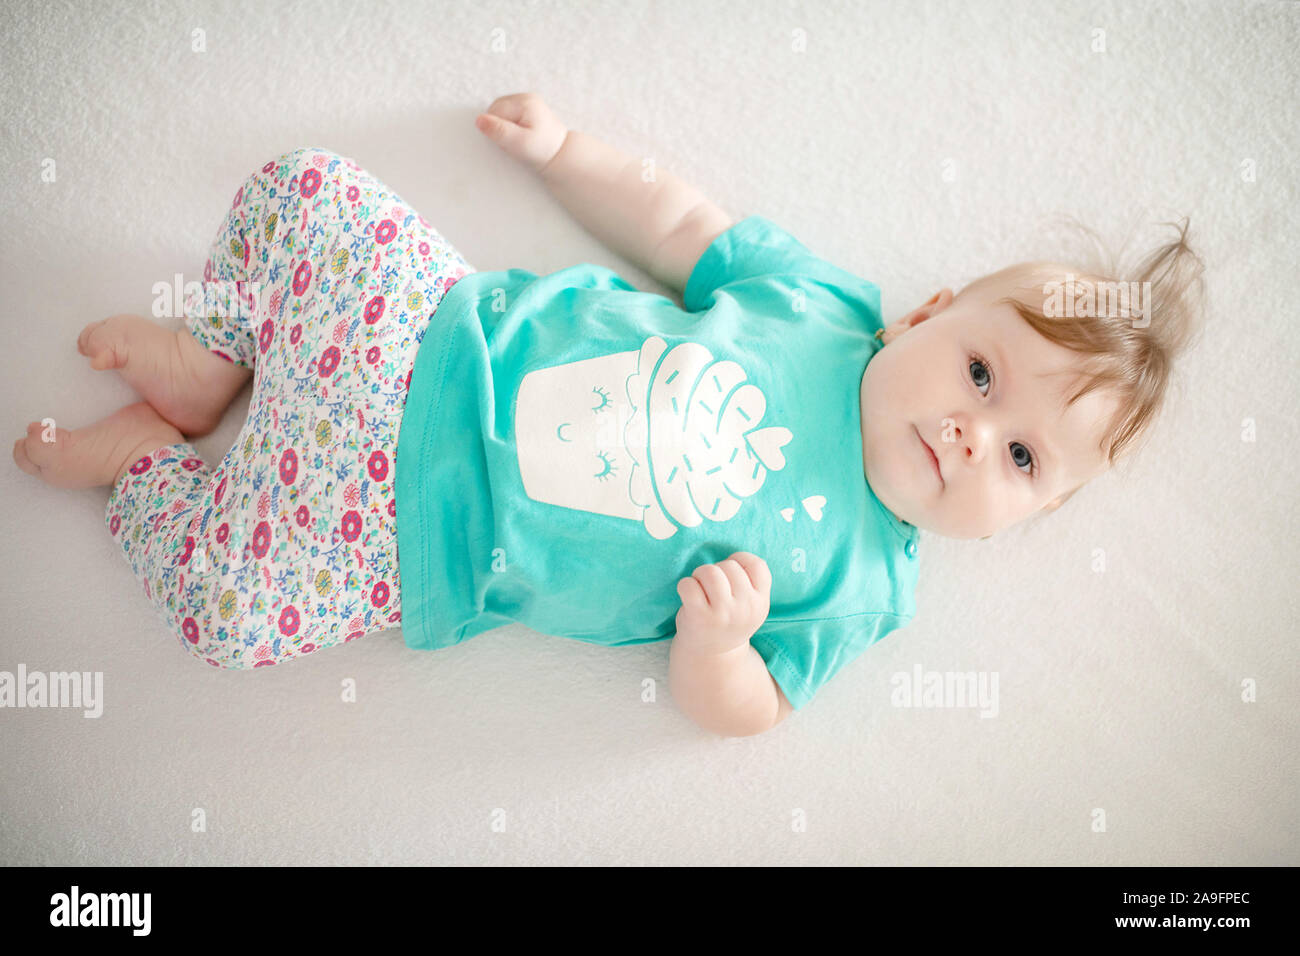 Portrait of adorable baby girl with blue eyes and cute hair looking at the camera calmly with curiosity; cute baby facial expressions, family concepts Stock Photo